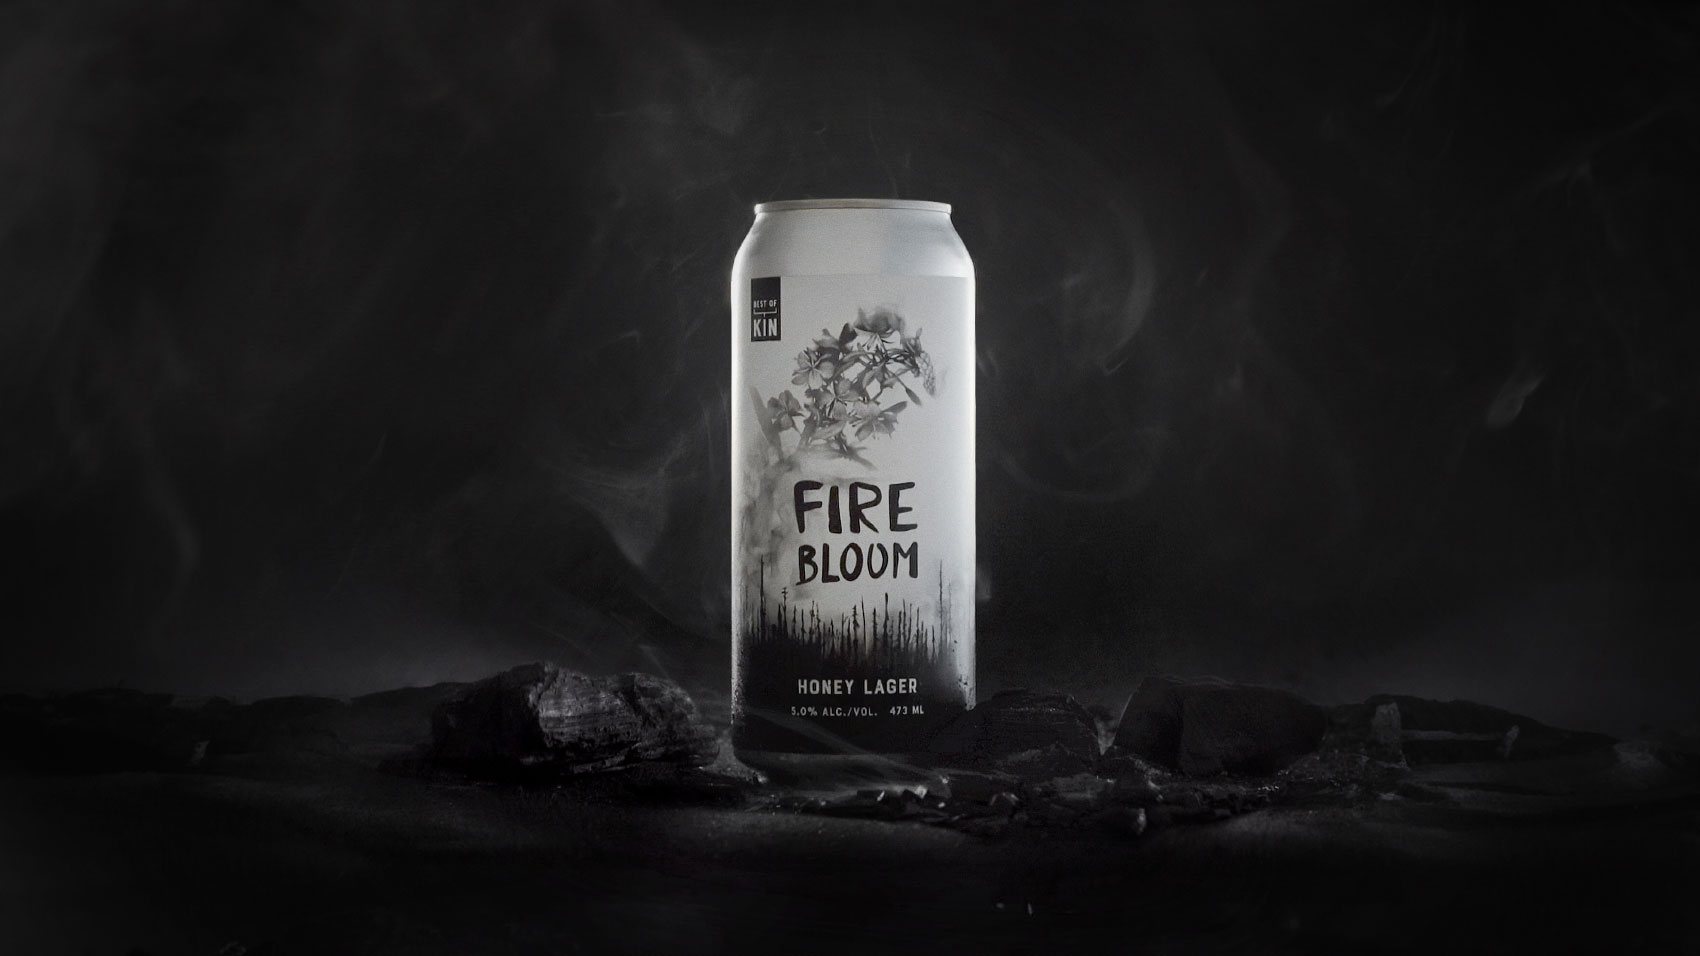 Can of Fire Bloom